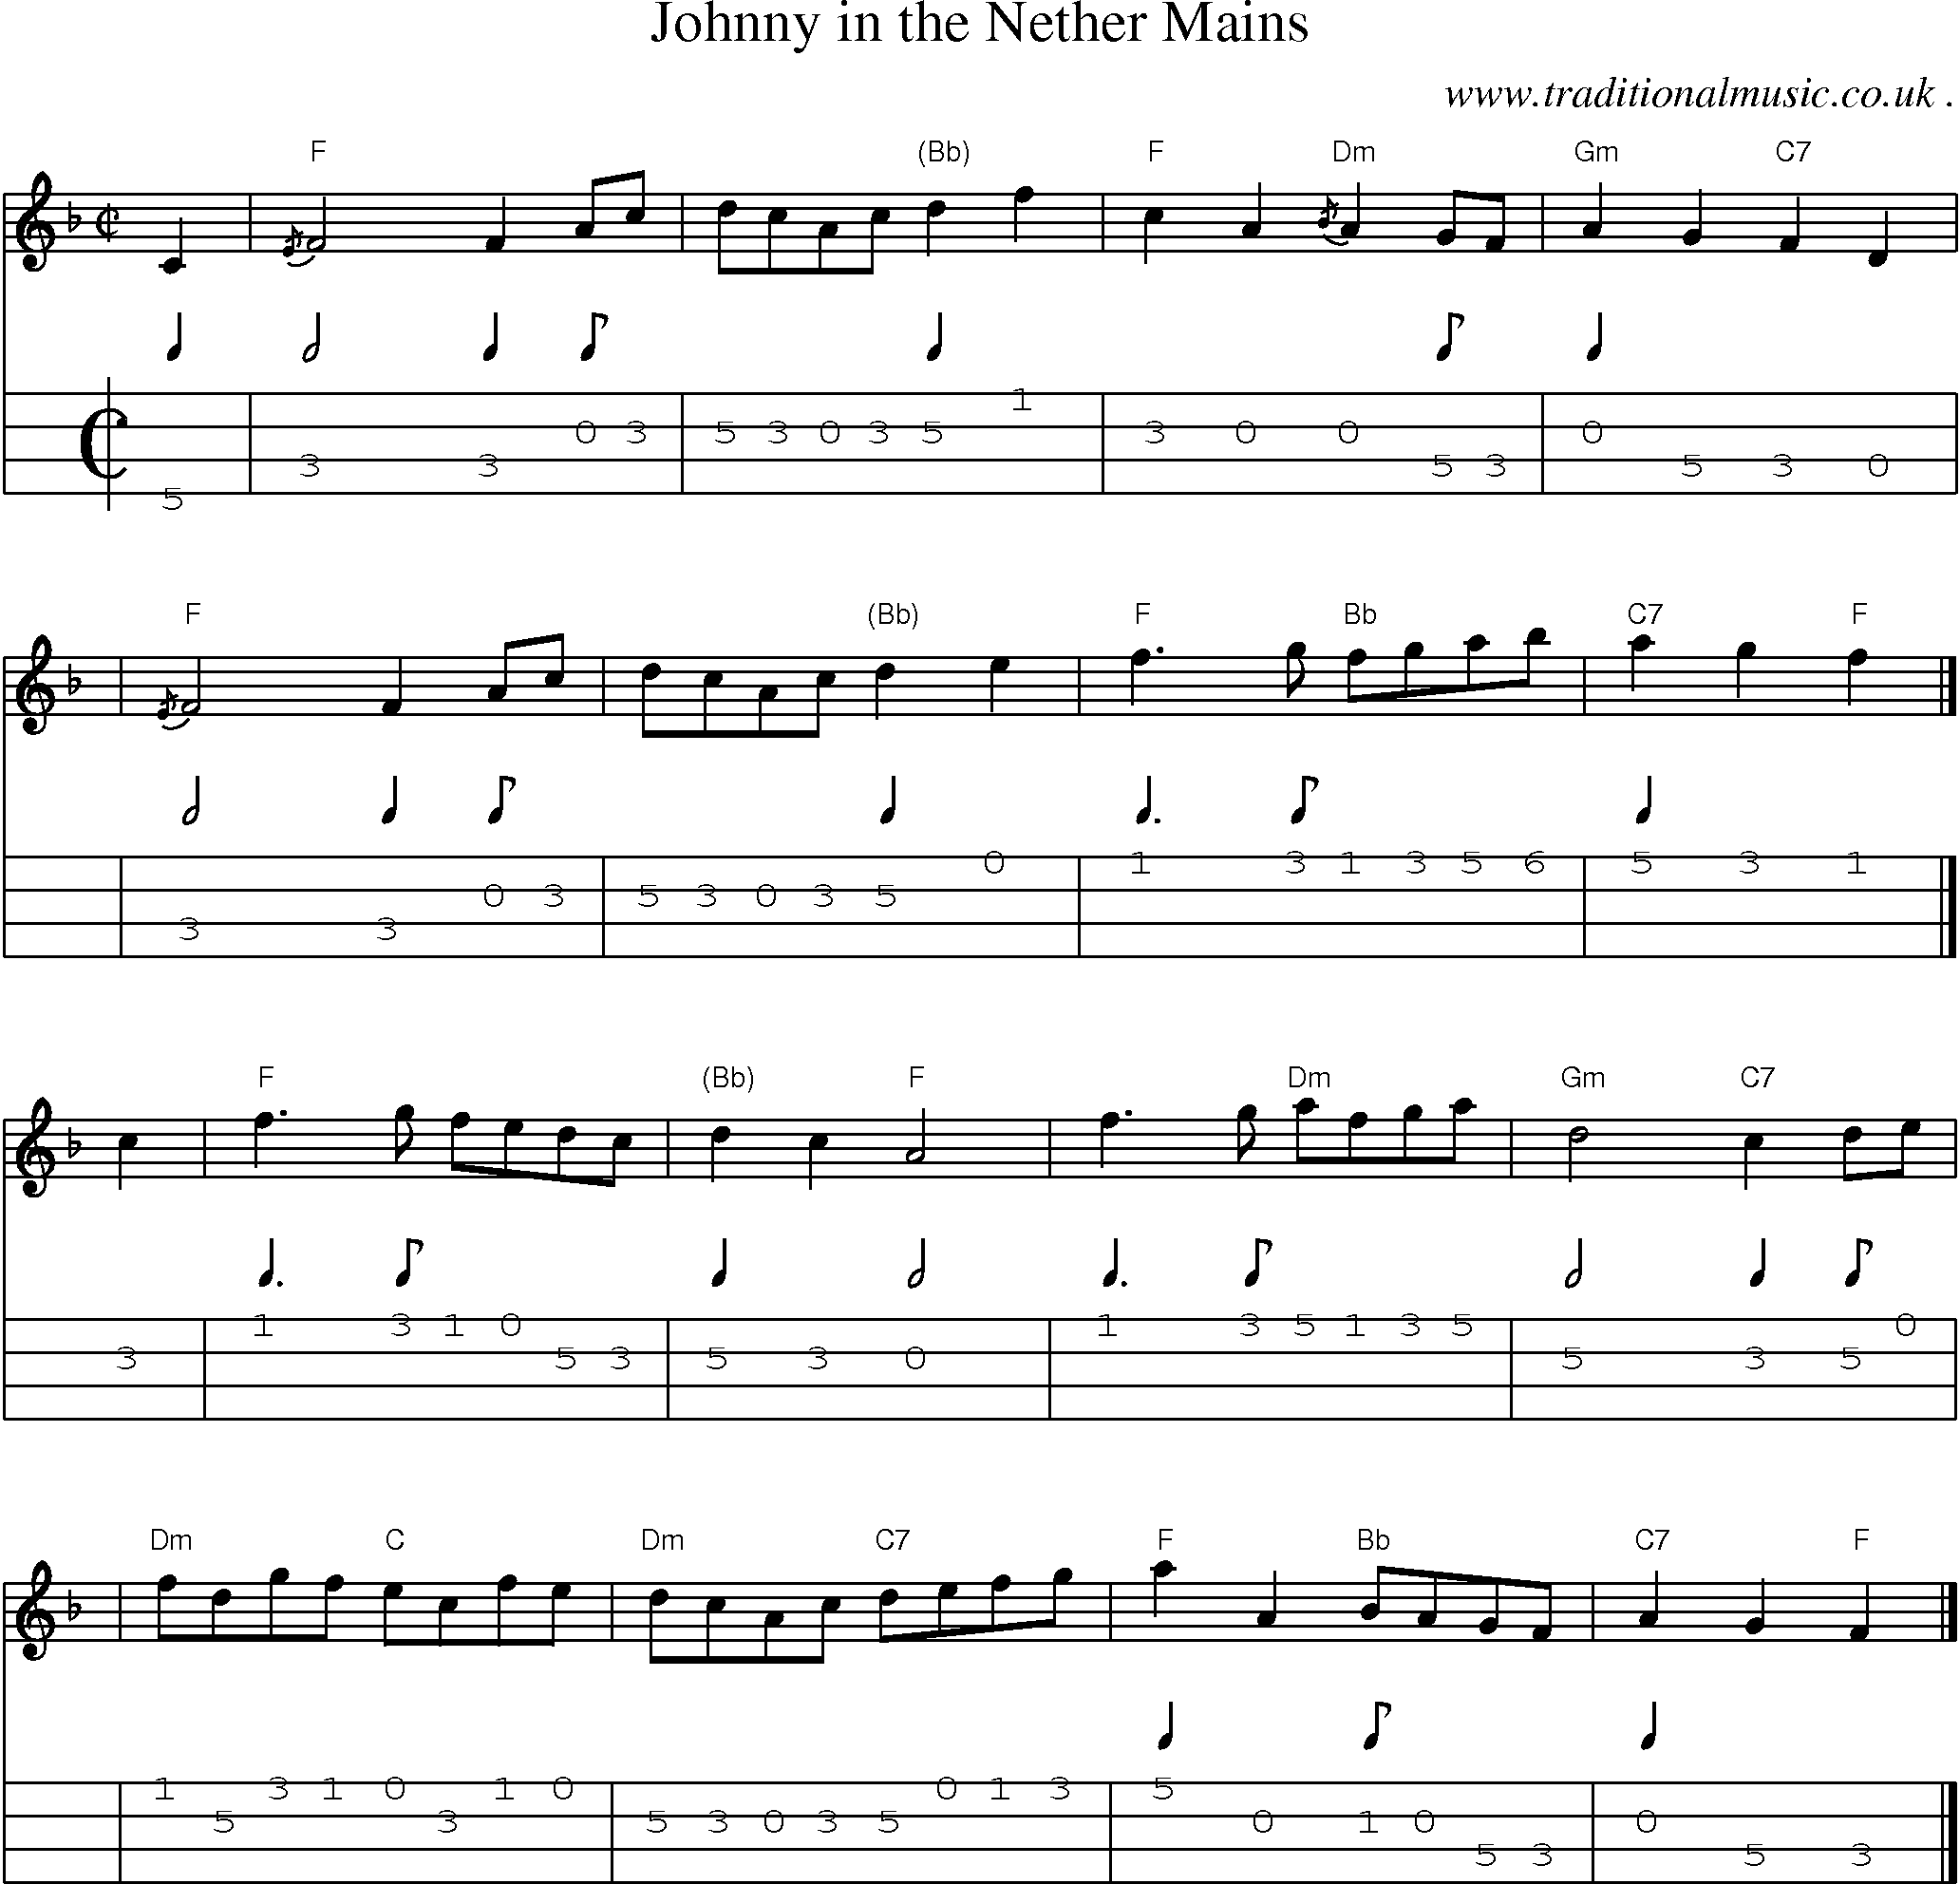 Sheet-music  score, Chords and Mandolin Tabs for Johnny In The Nether Mains